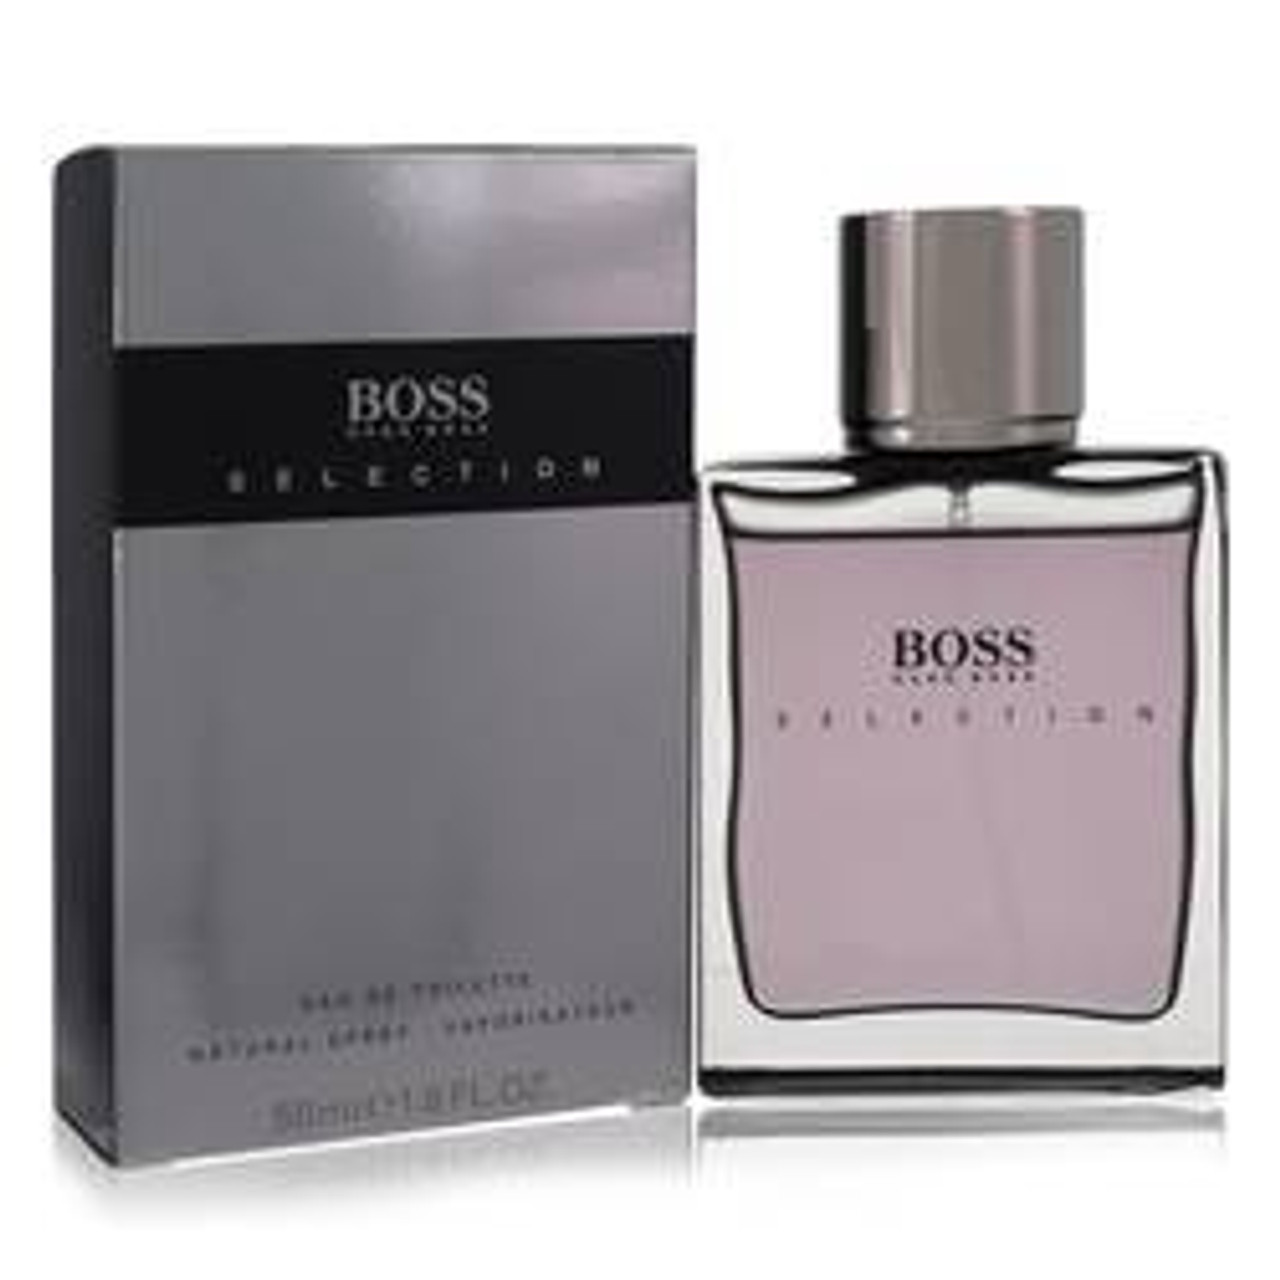 Boss Selection Cologne By Hugo Boss Eau De Toilette Spray 1.7 oz for Men - [From 132.00 - Choose pk Qty ] - *Ships from Miami